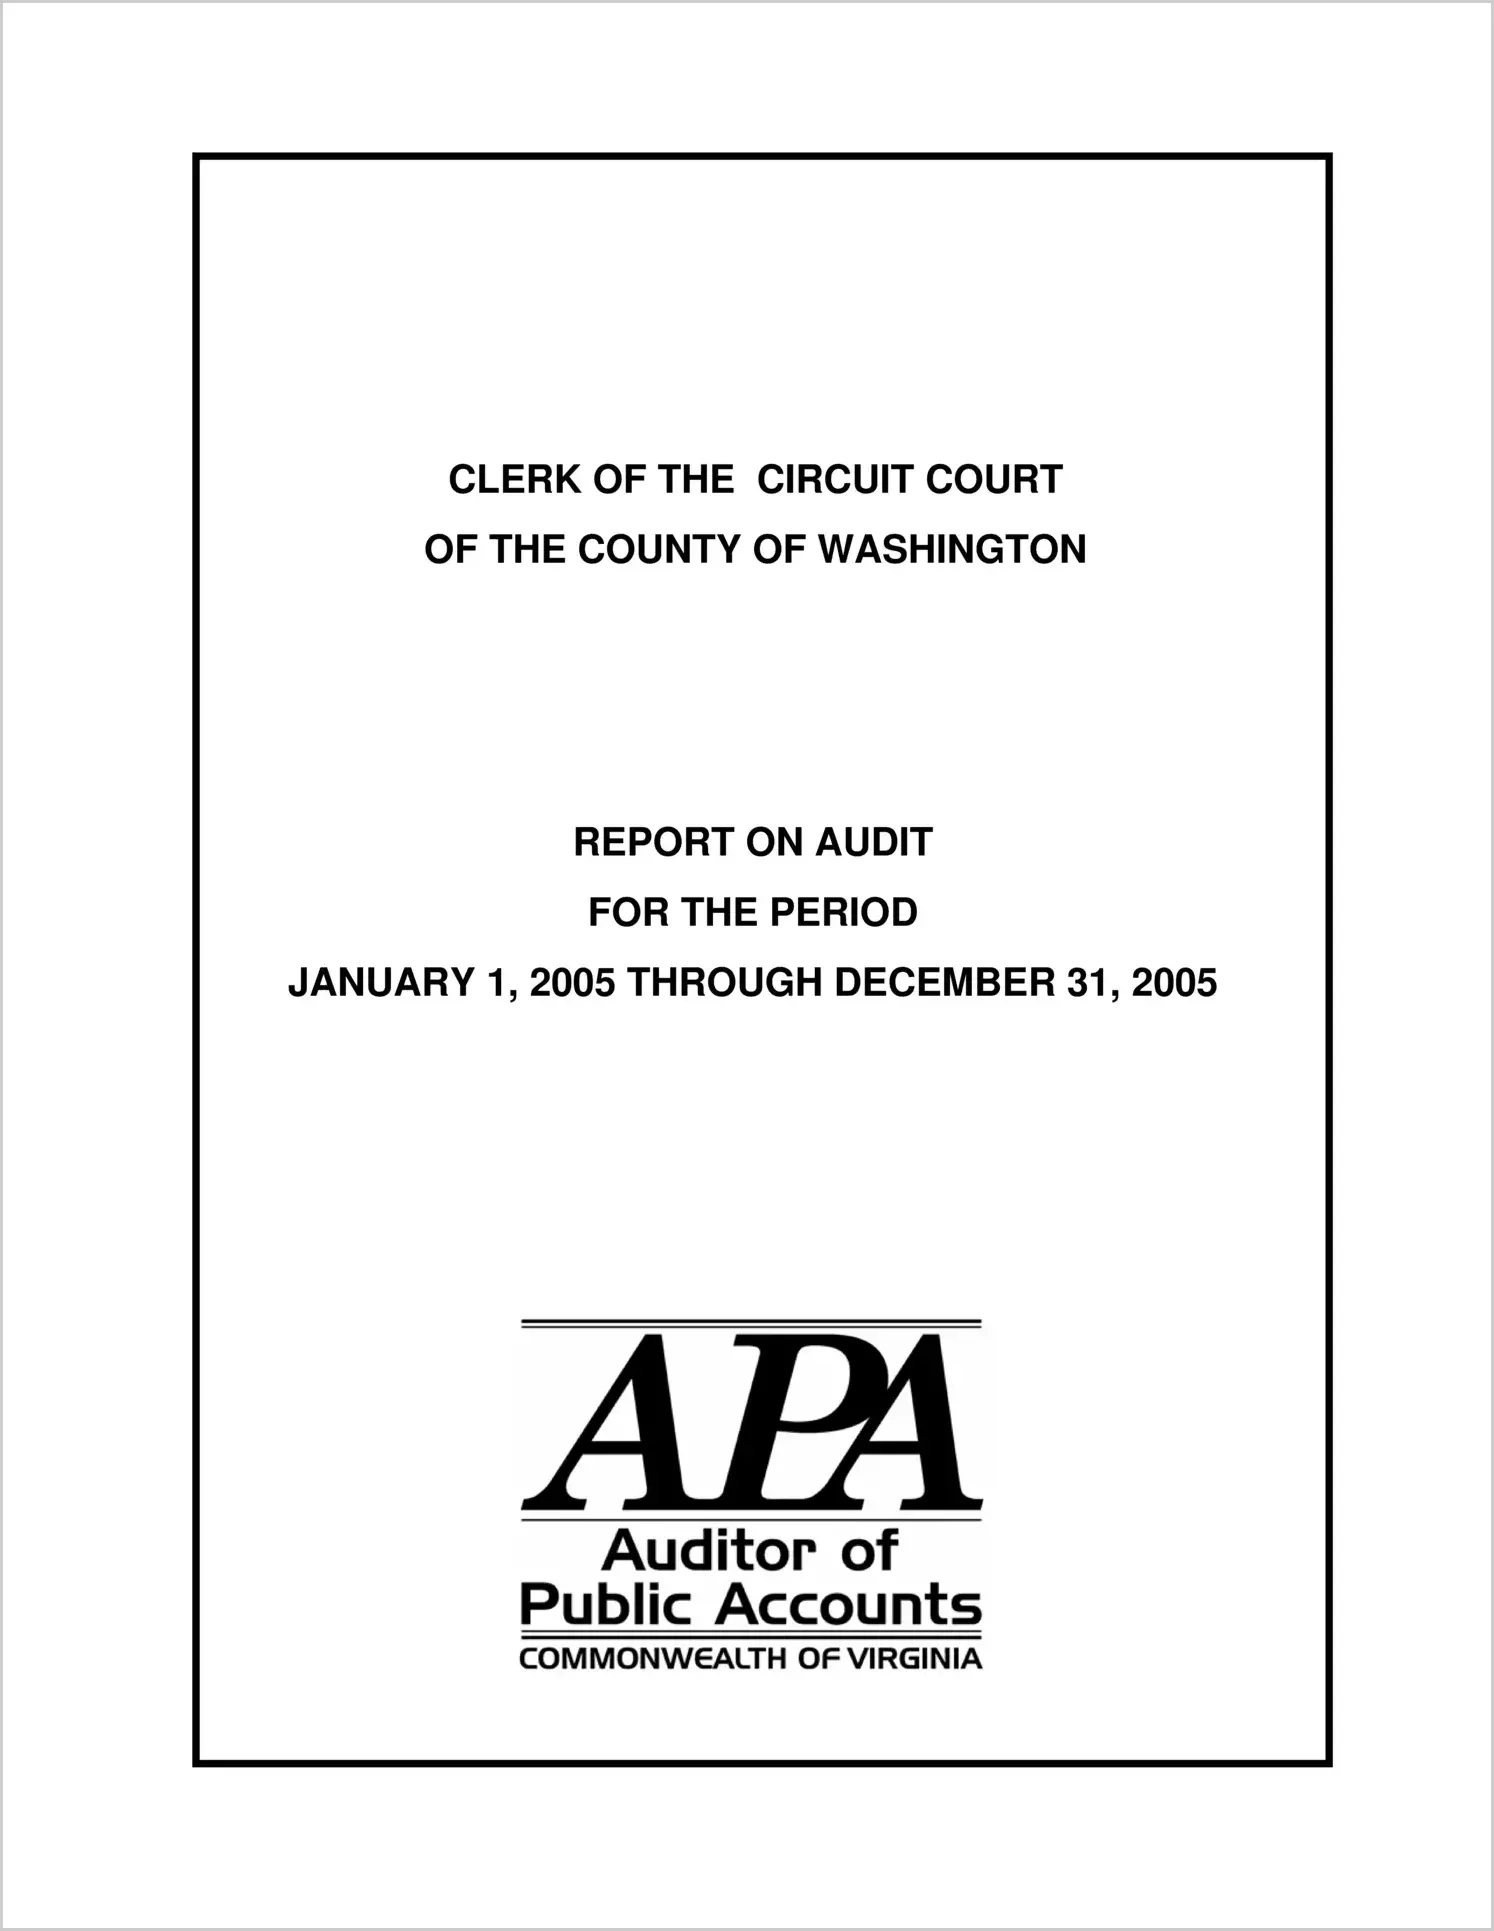 Clerk of the Circuit Court of the County of Washington for the period January 1, 2005 through December 31, 2005.